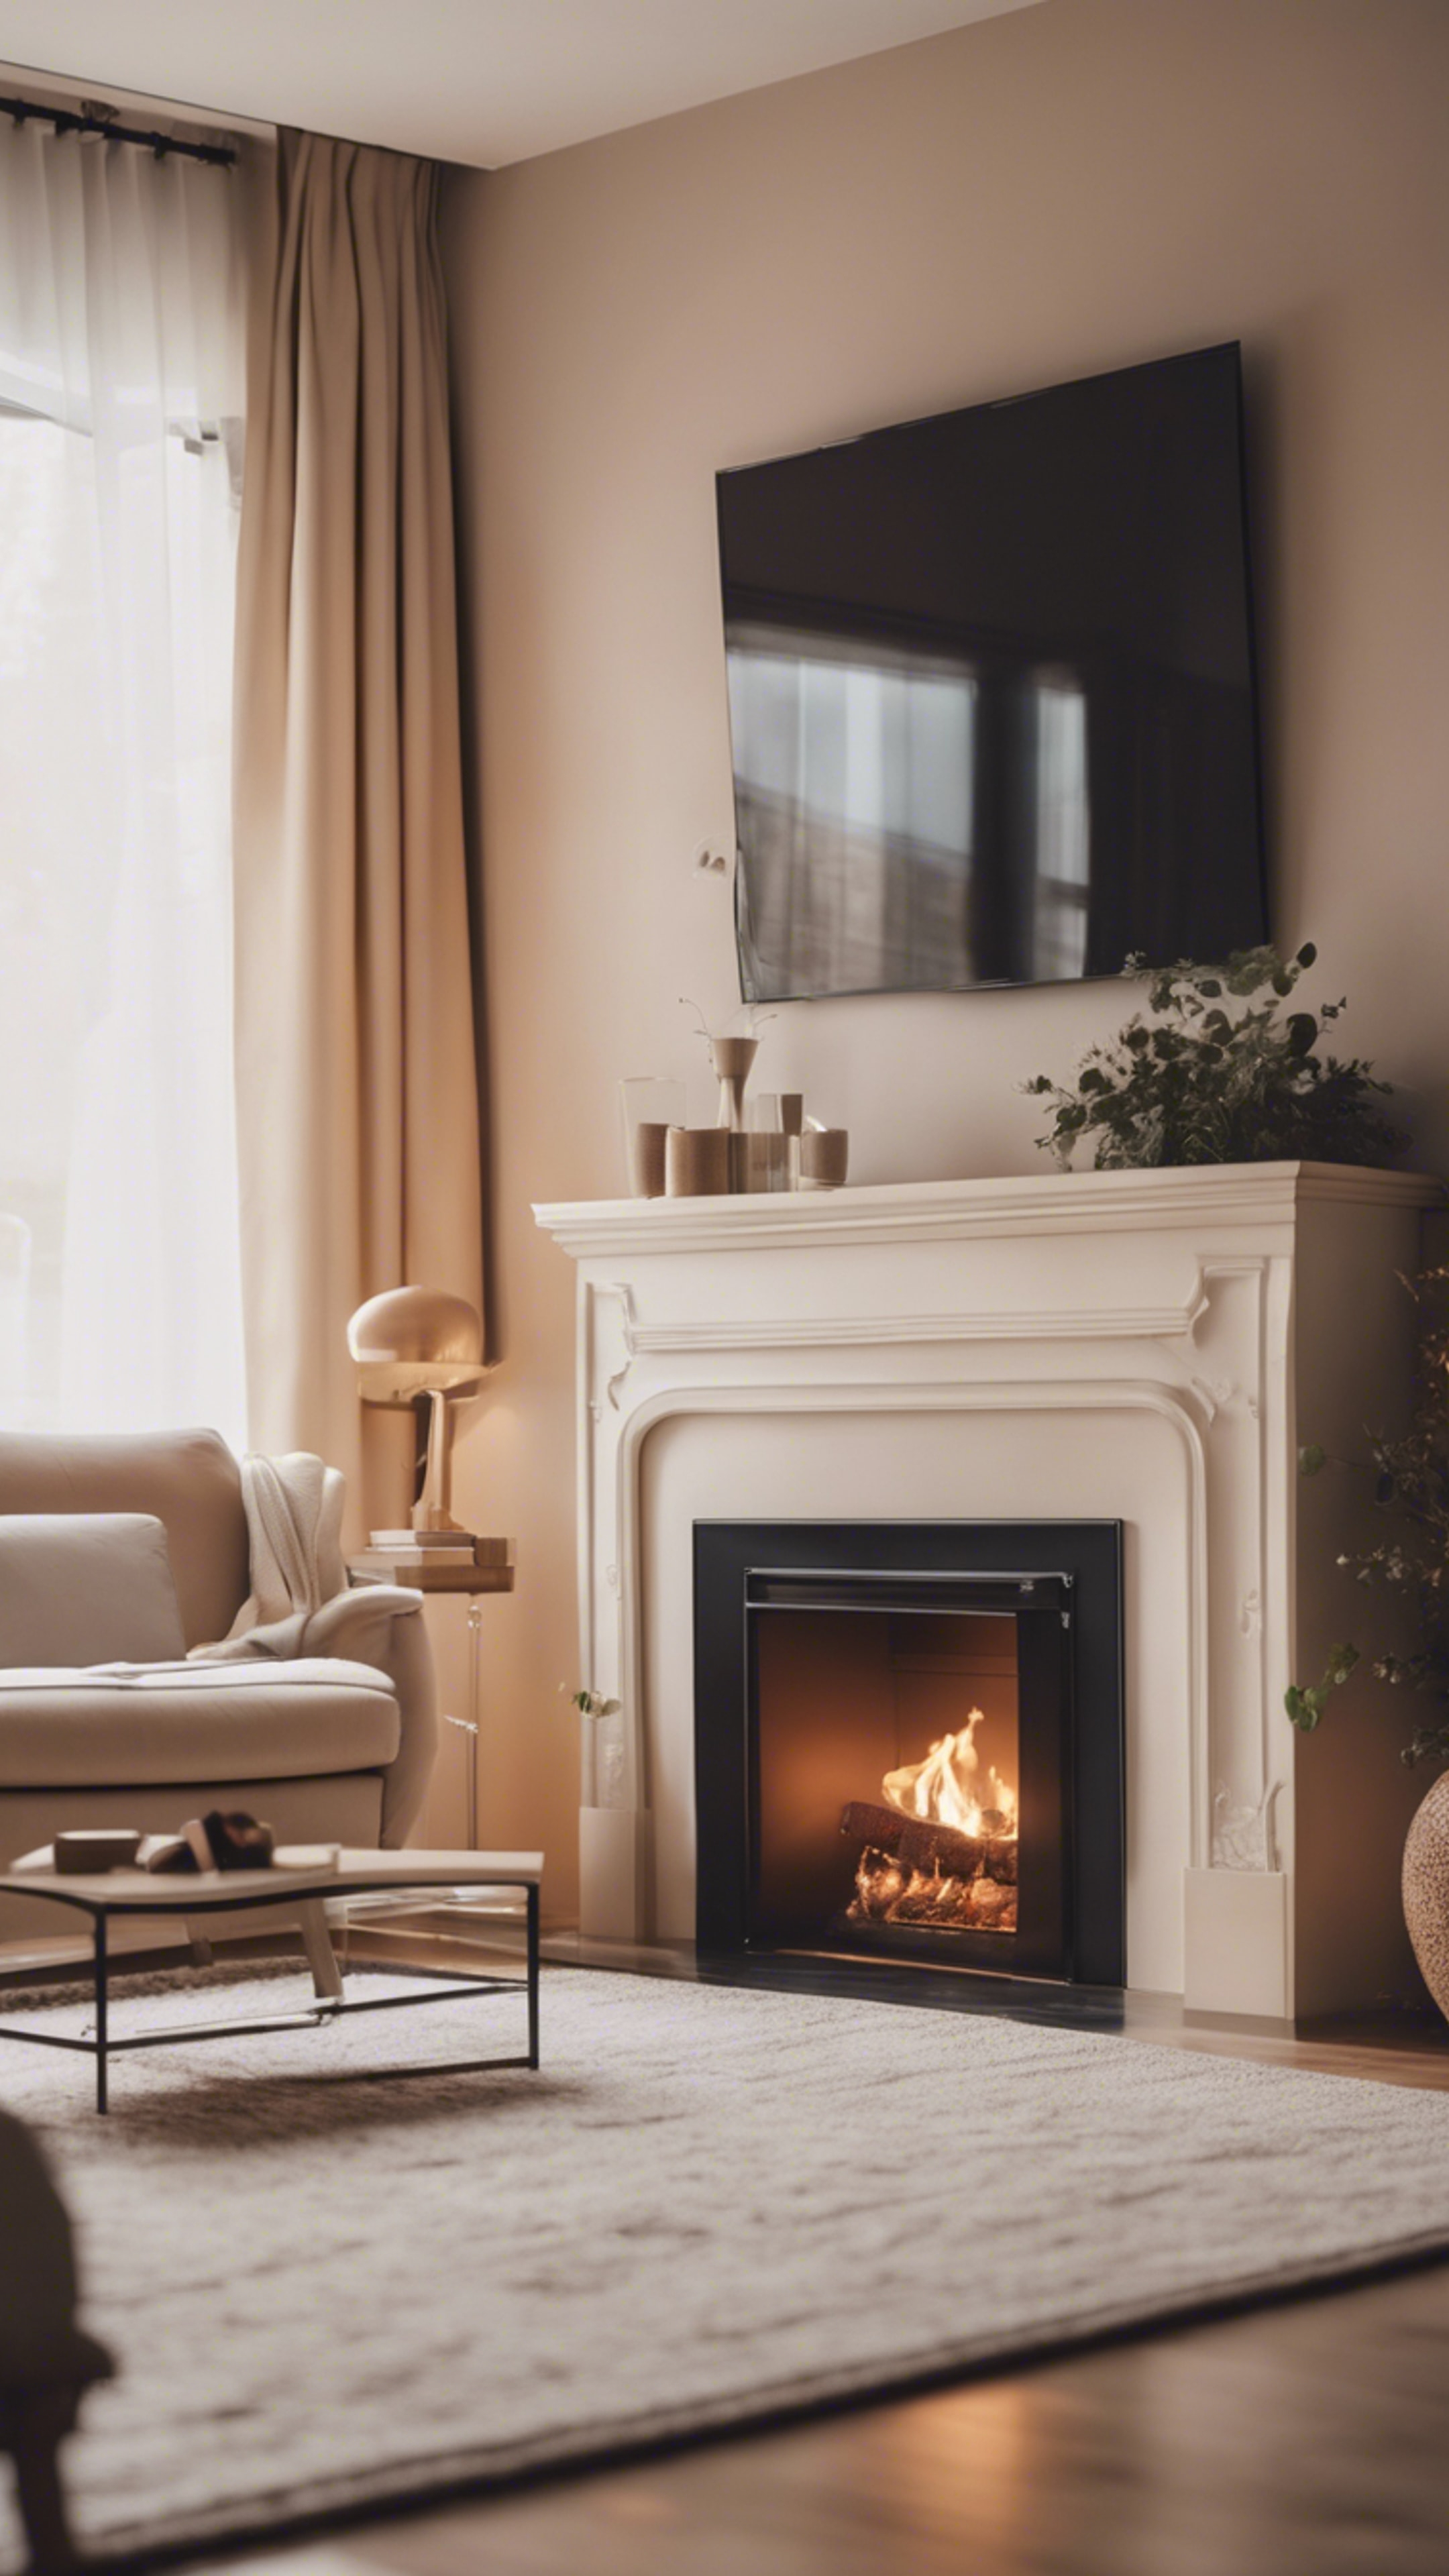 A cozy and tranquil cool beige living room with a fireplace alive with dancing flames. Wallpaper[fdd7e3460c134e479b57]